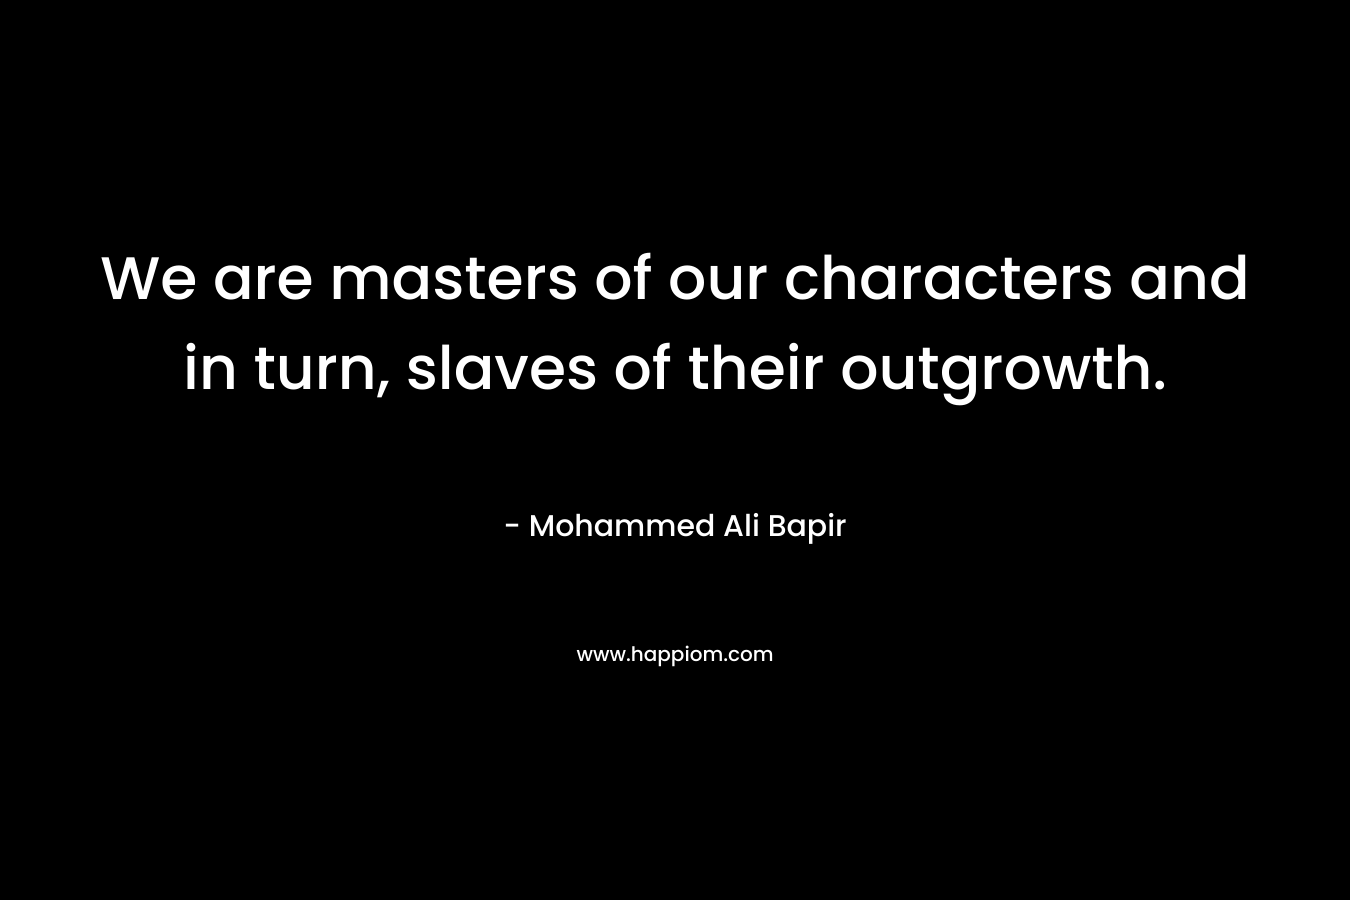 We are masters of our characters and in turn, slaves of their outgrowth. – Mohammed Ali Bapir